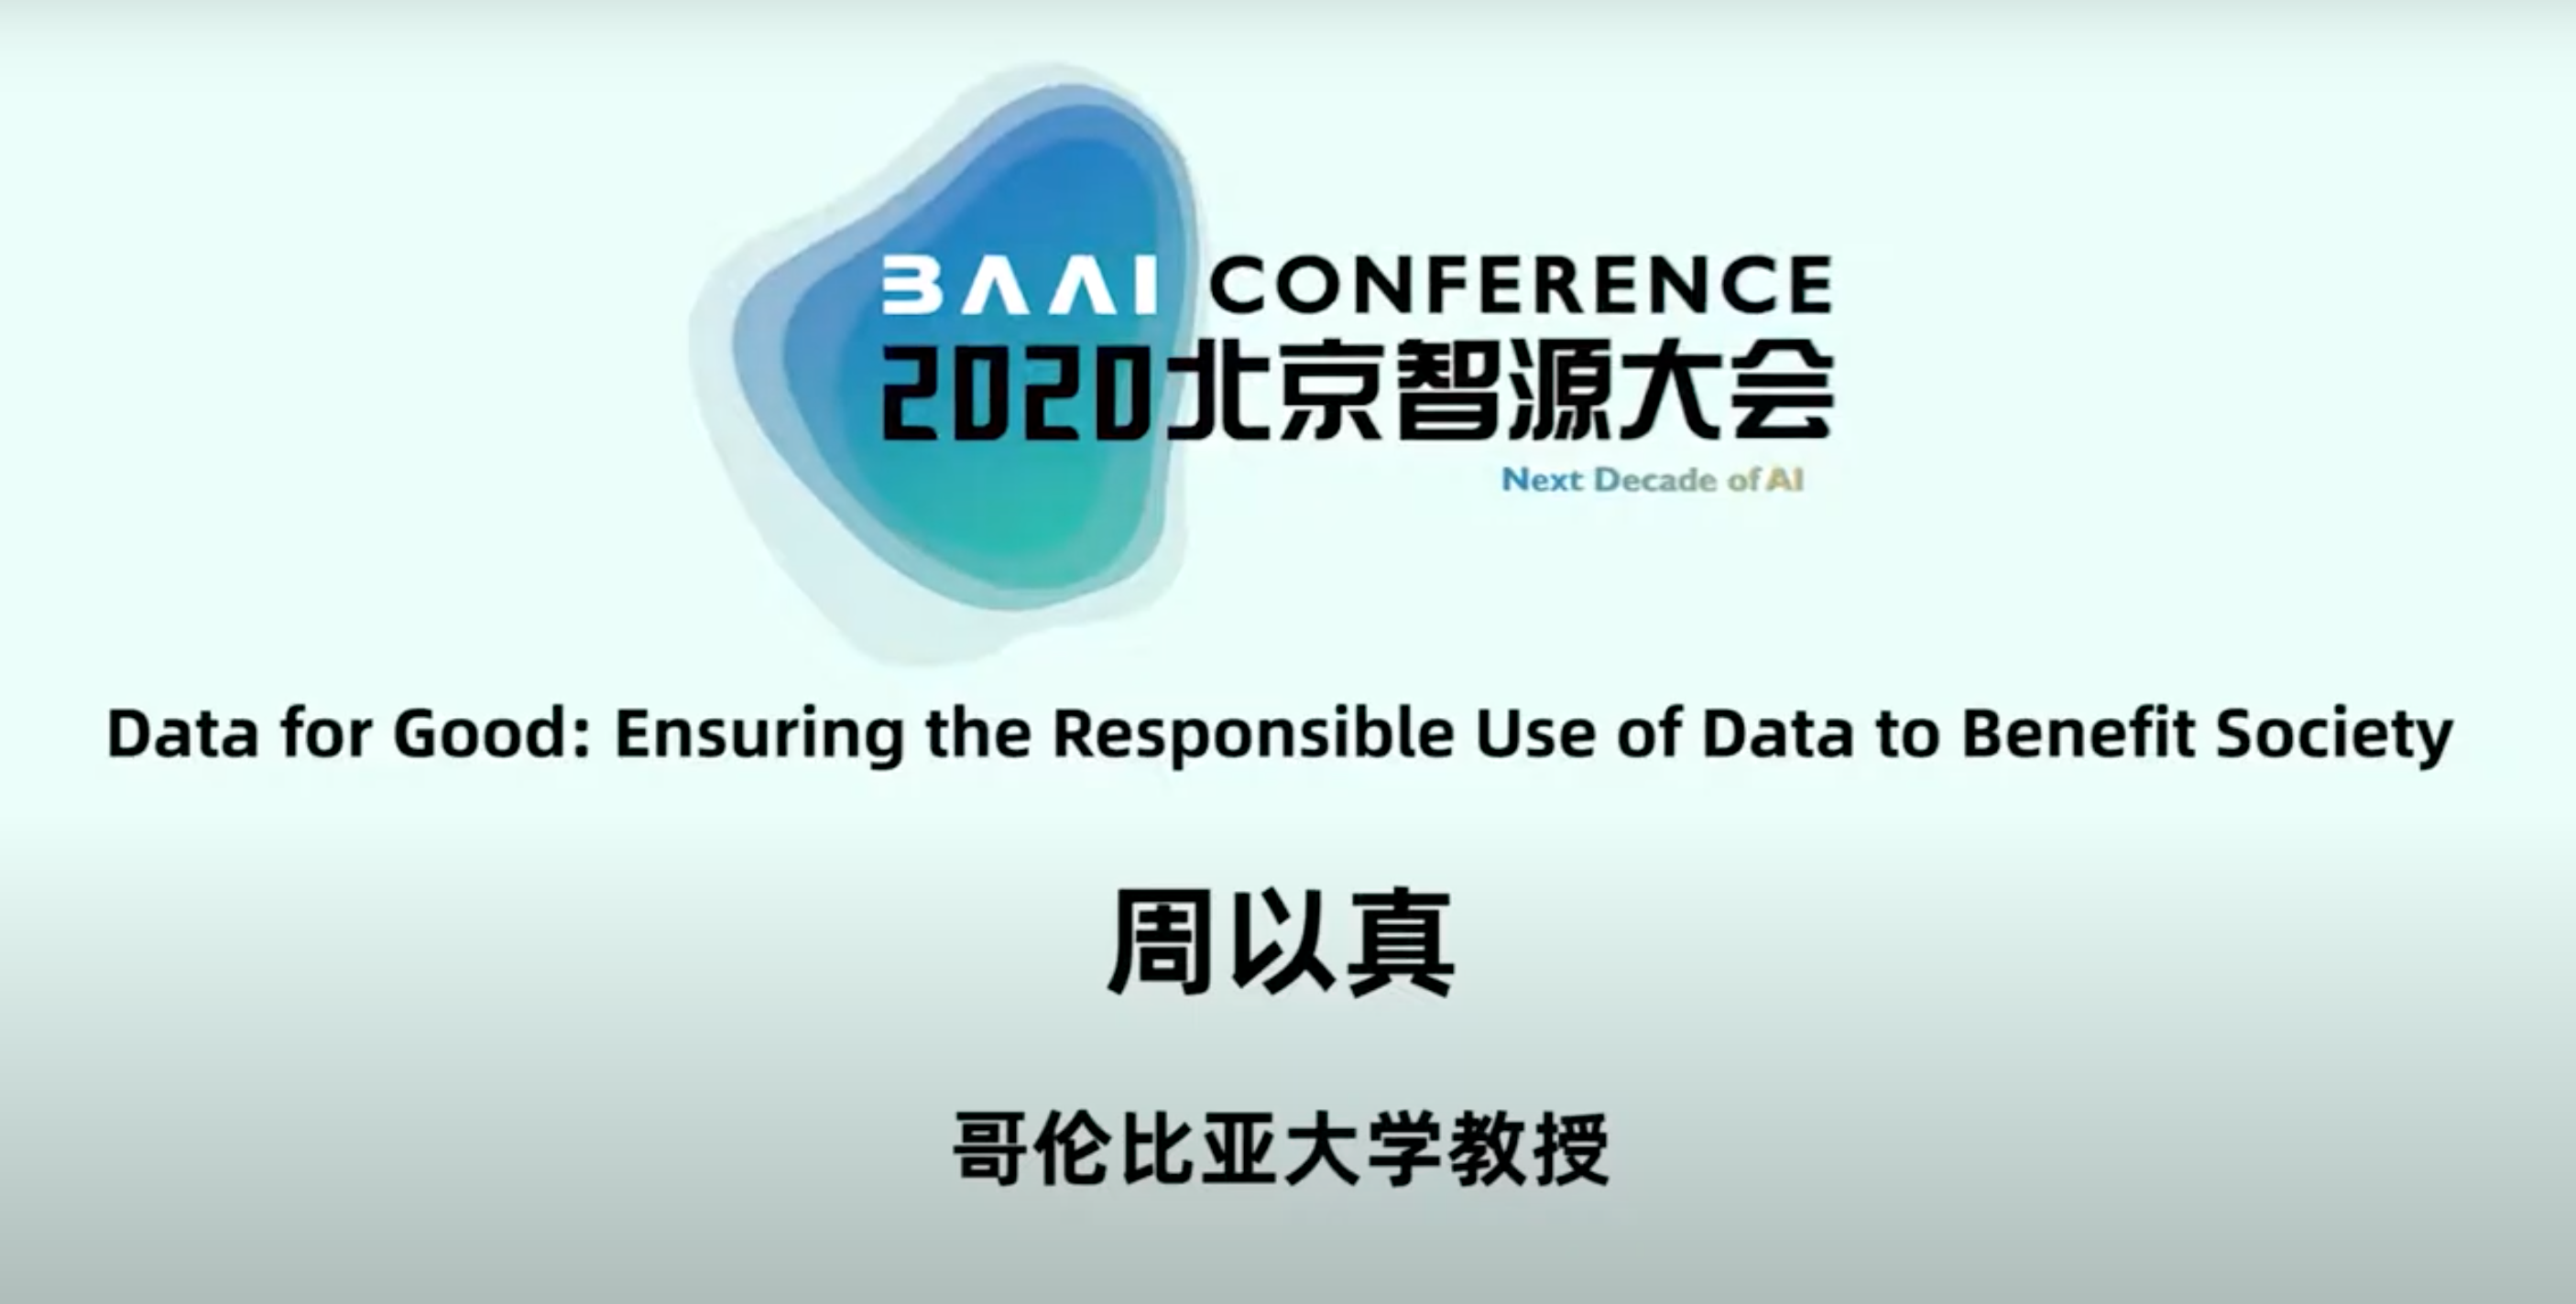 WATCH DSI Director M. Wing on Data for Good BAAI